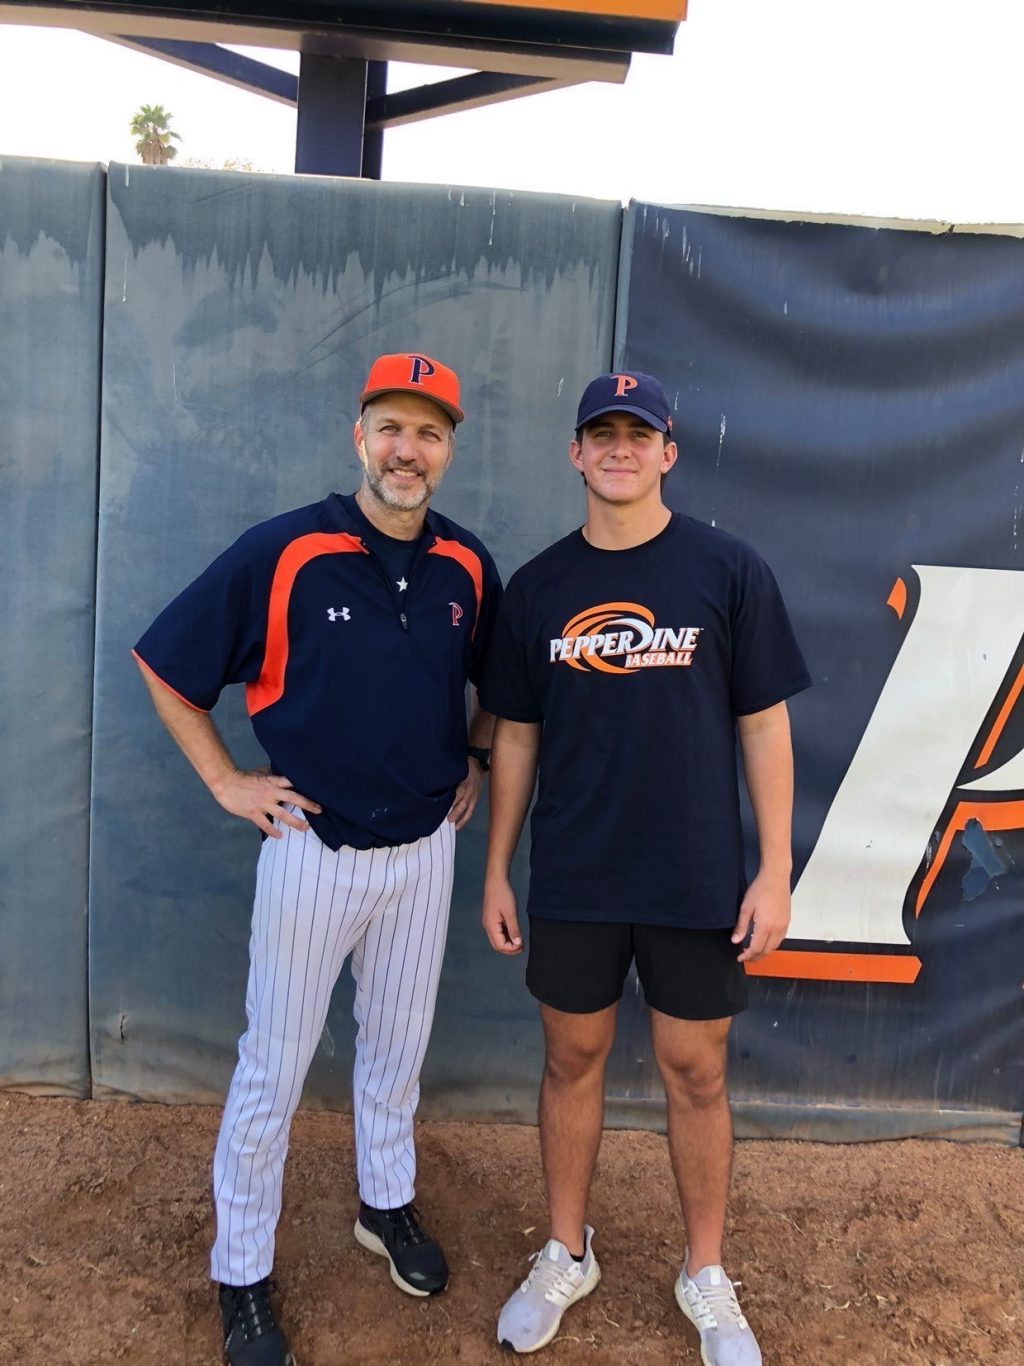 Volunteer baseball coach Patrick Ahearne and Adam Troy pose for a picture the first day of the Pepperdine baseball recruitment camp. Ahearne is a long-time friend of Troy's dad, which led to his desire to play baseball for Pepperdine. Photo Courtesy of Adam Troy